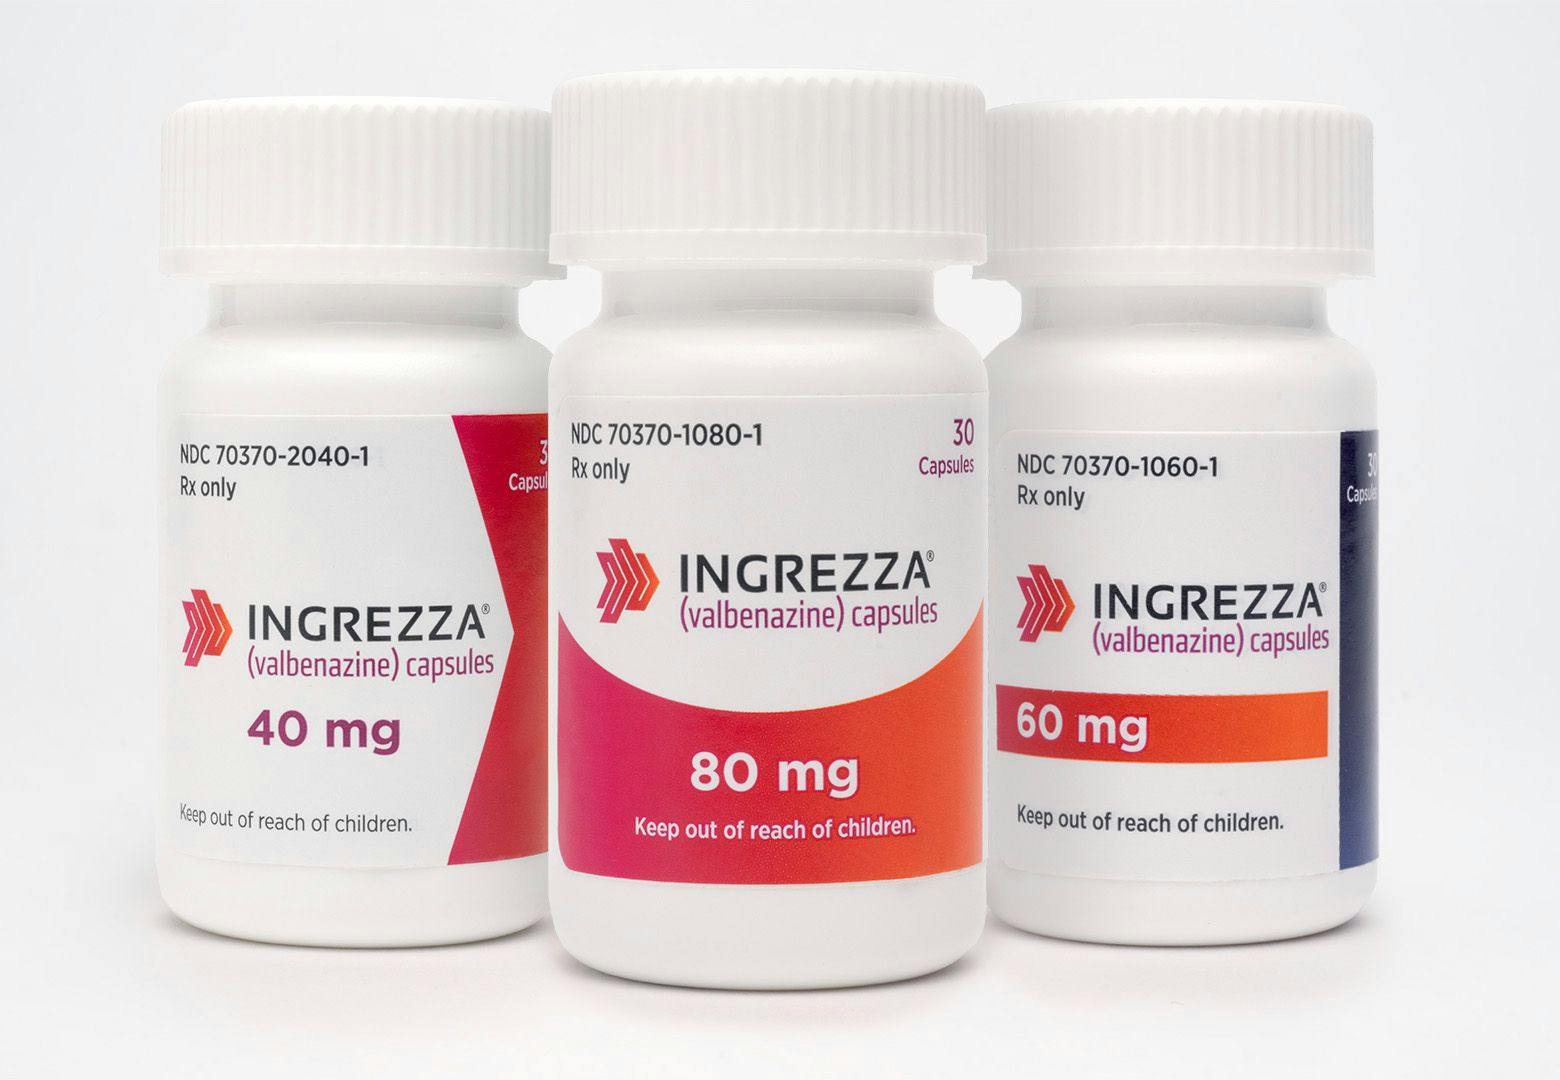  FDA Approves Ingrezza for Disorder Associated with Huntington’s Disease